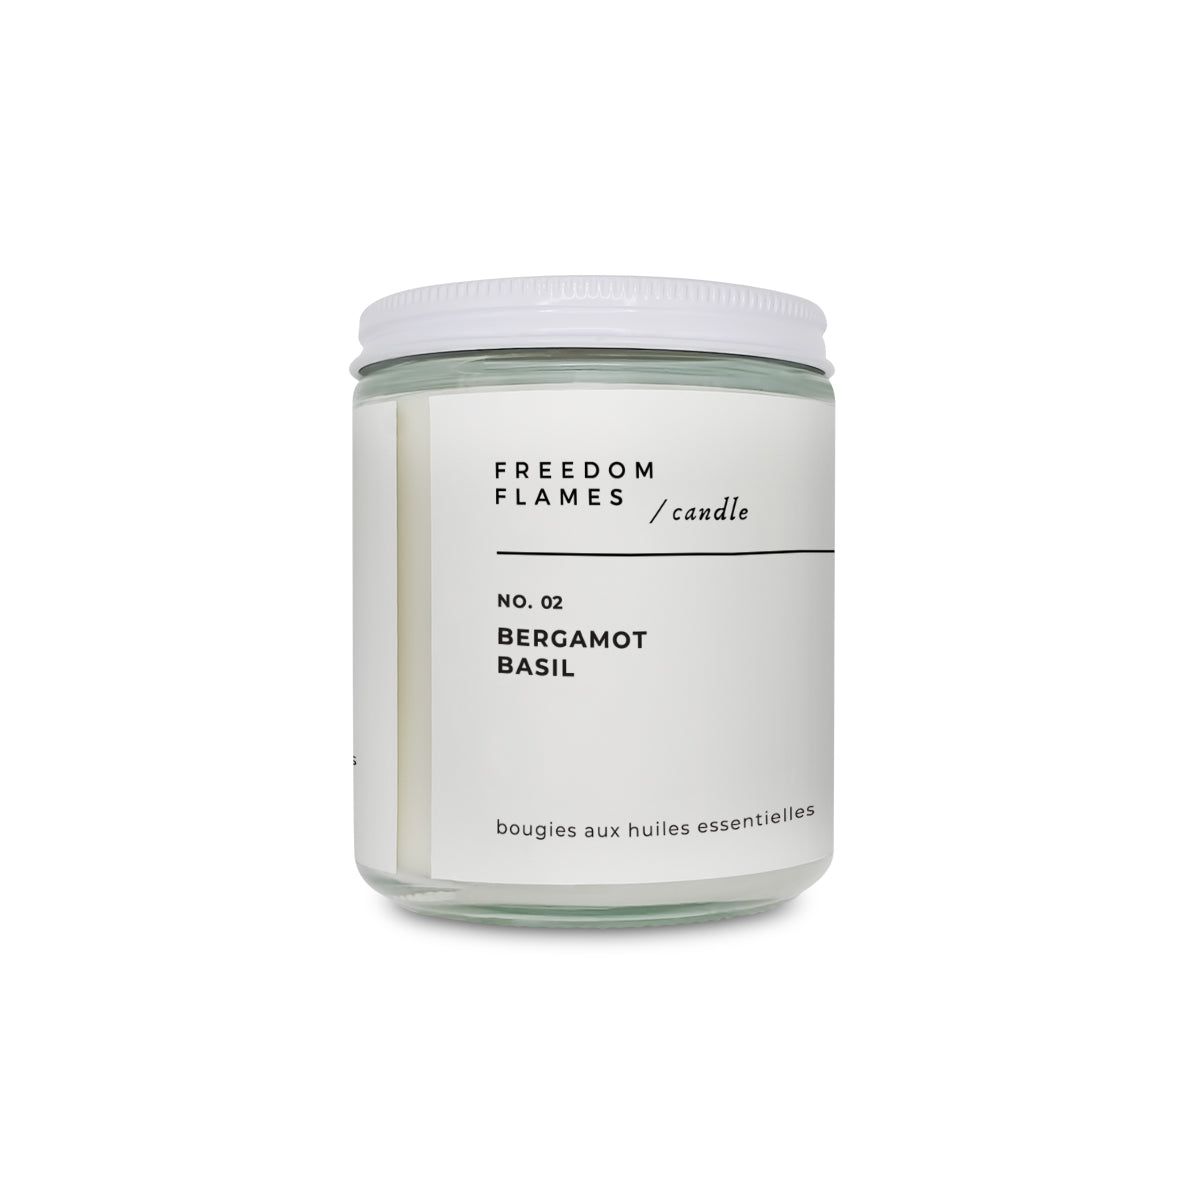 Freedom Flames Bergamot Basil Essential Oil Candle 250g | Home fragrances | The Green Collective SG